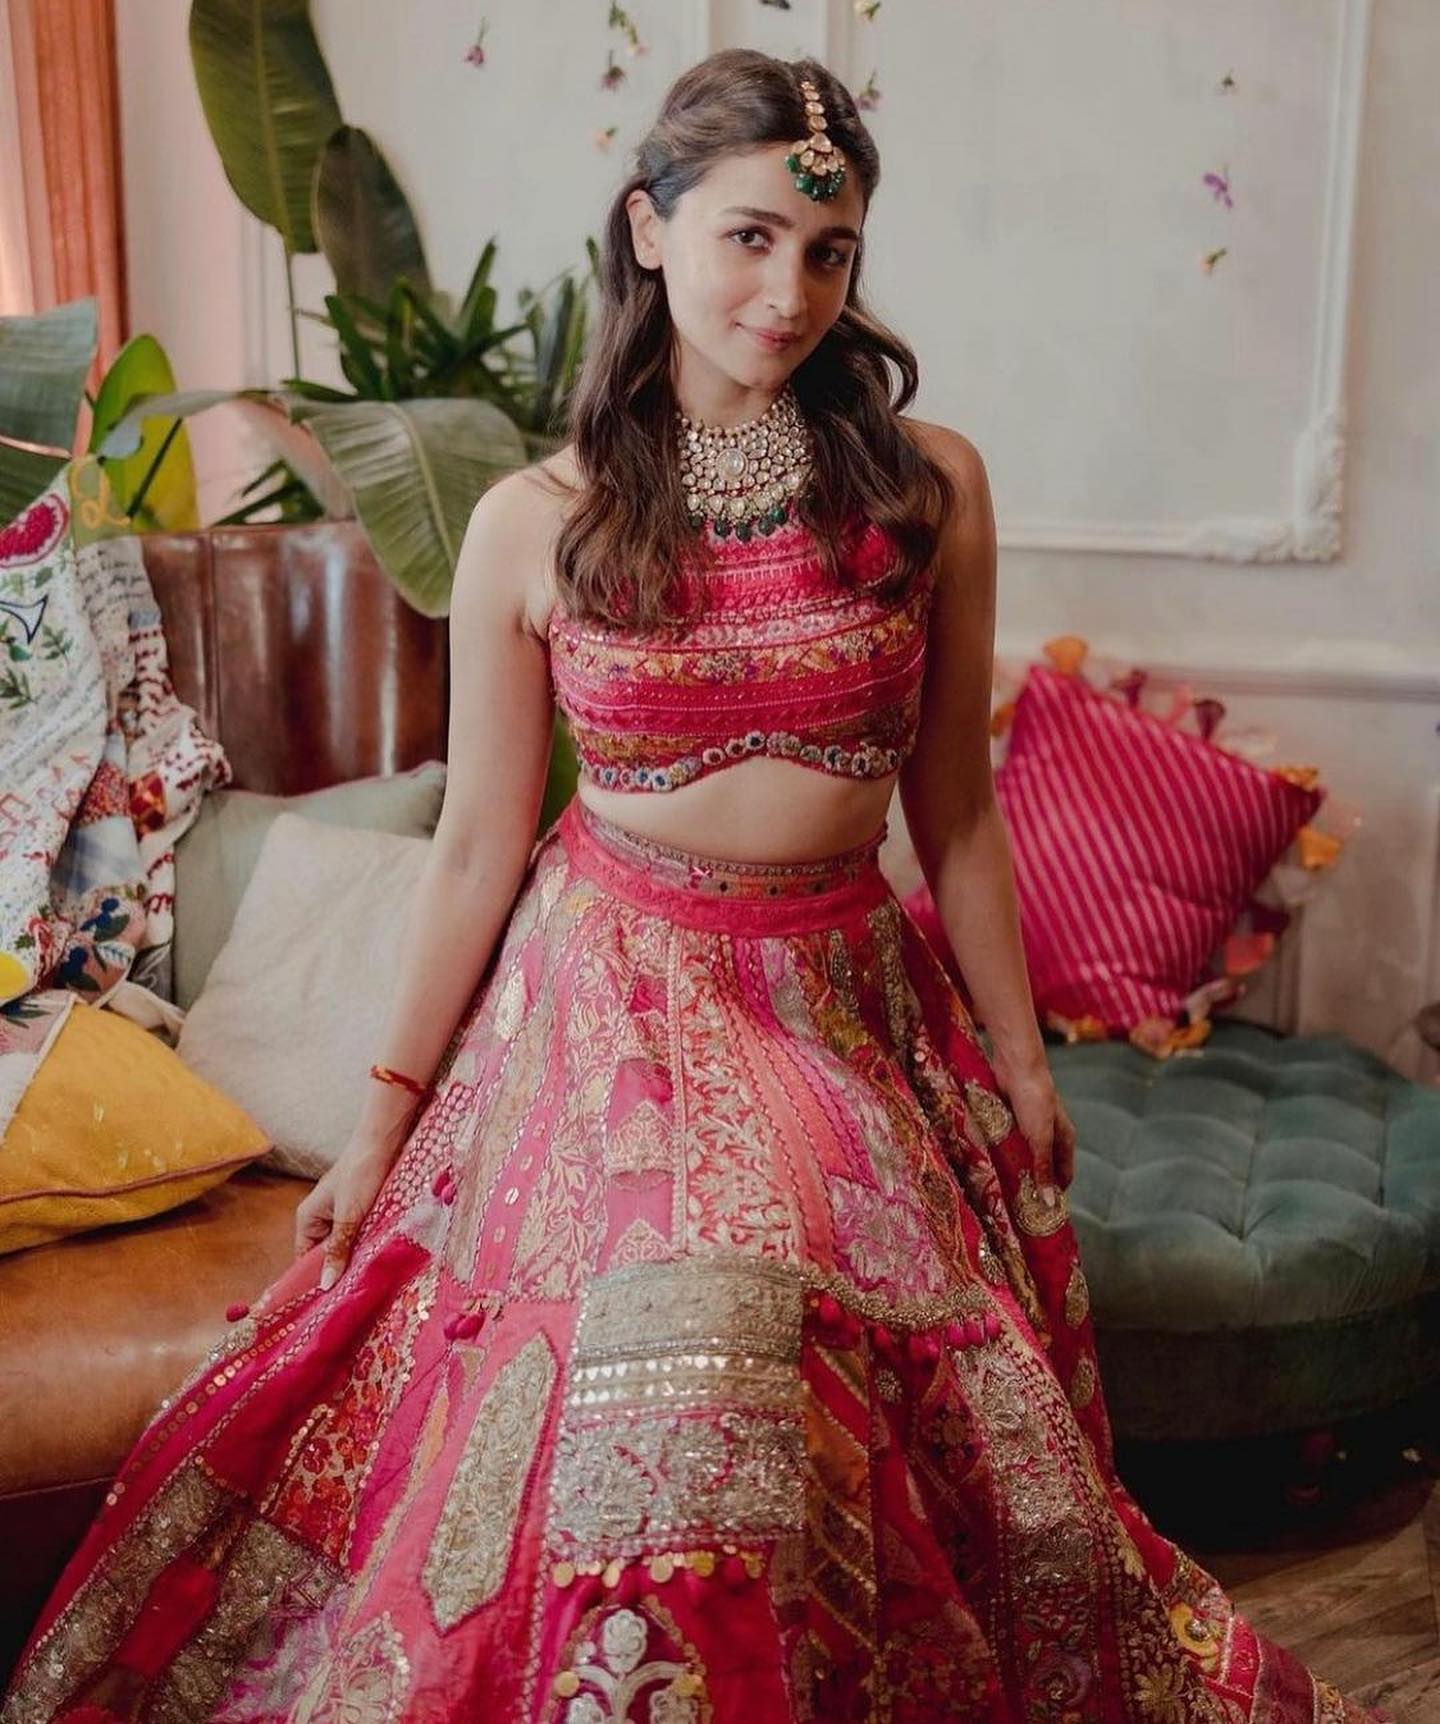 SCAKHI Peach Floral Print Crop Top With Lehenga Skirt